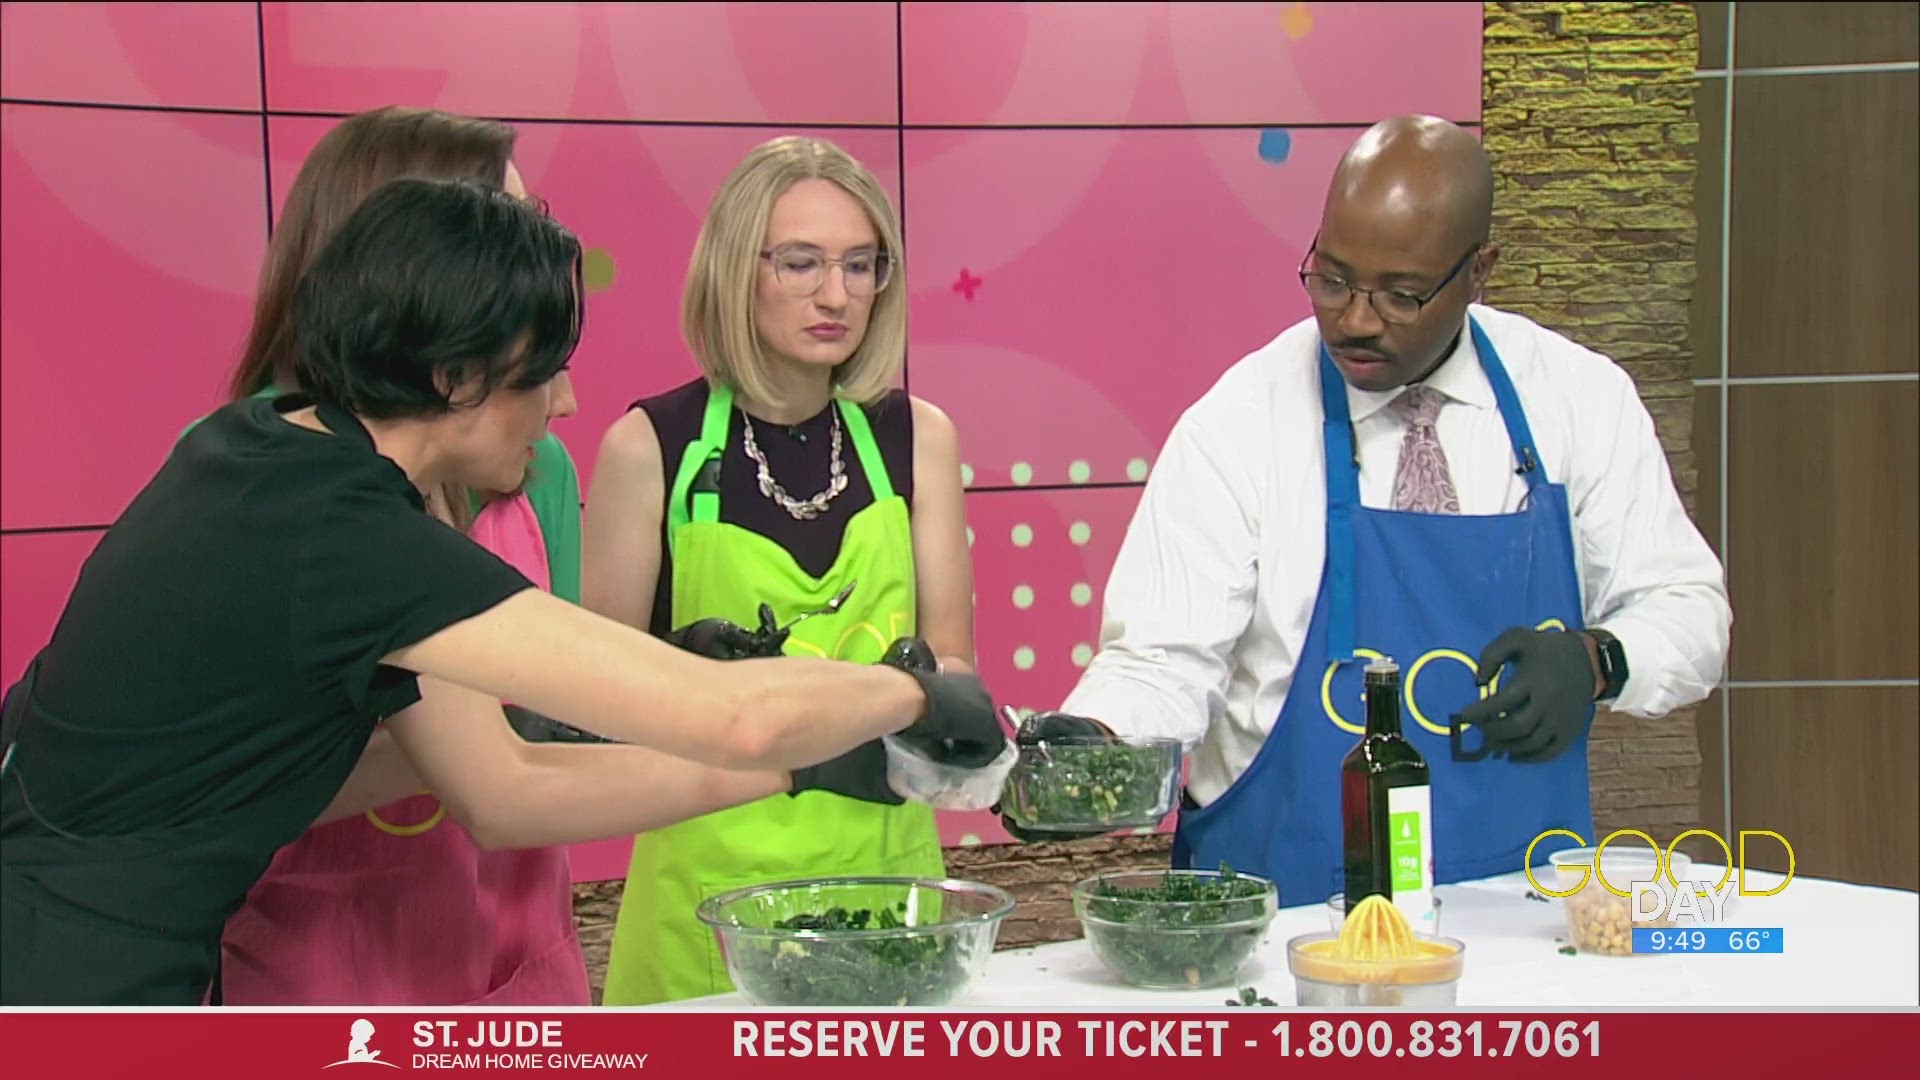 Solfood Collective Chef Jacquelyn Jones demonstrates a recipe for a vegan kale salad.